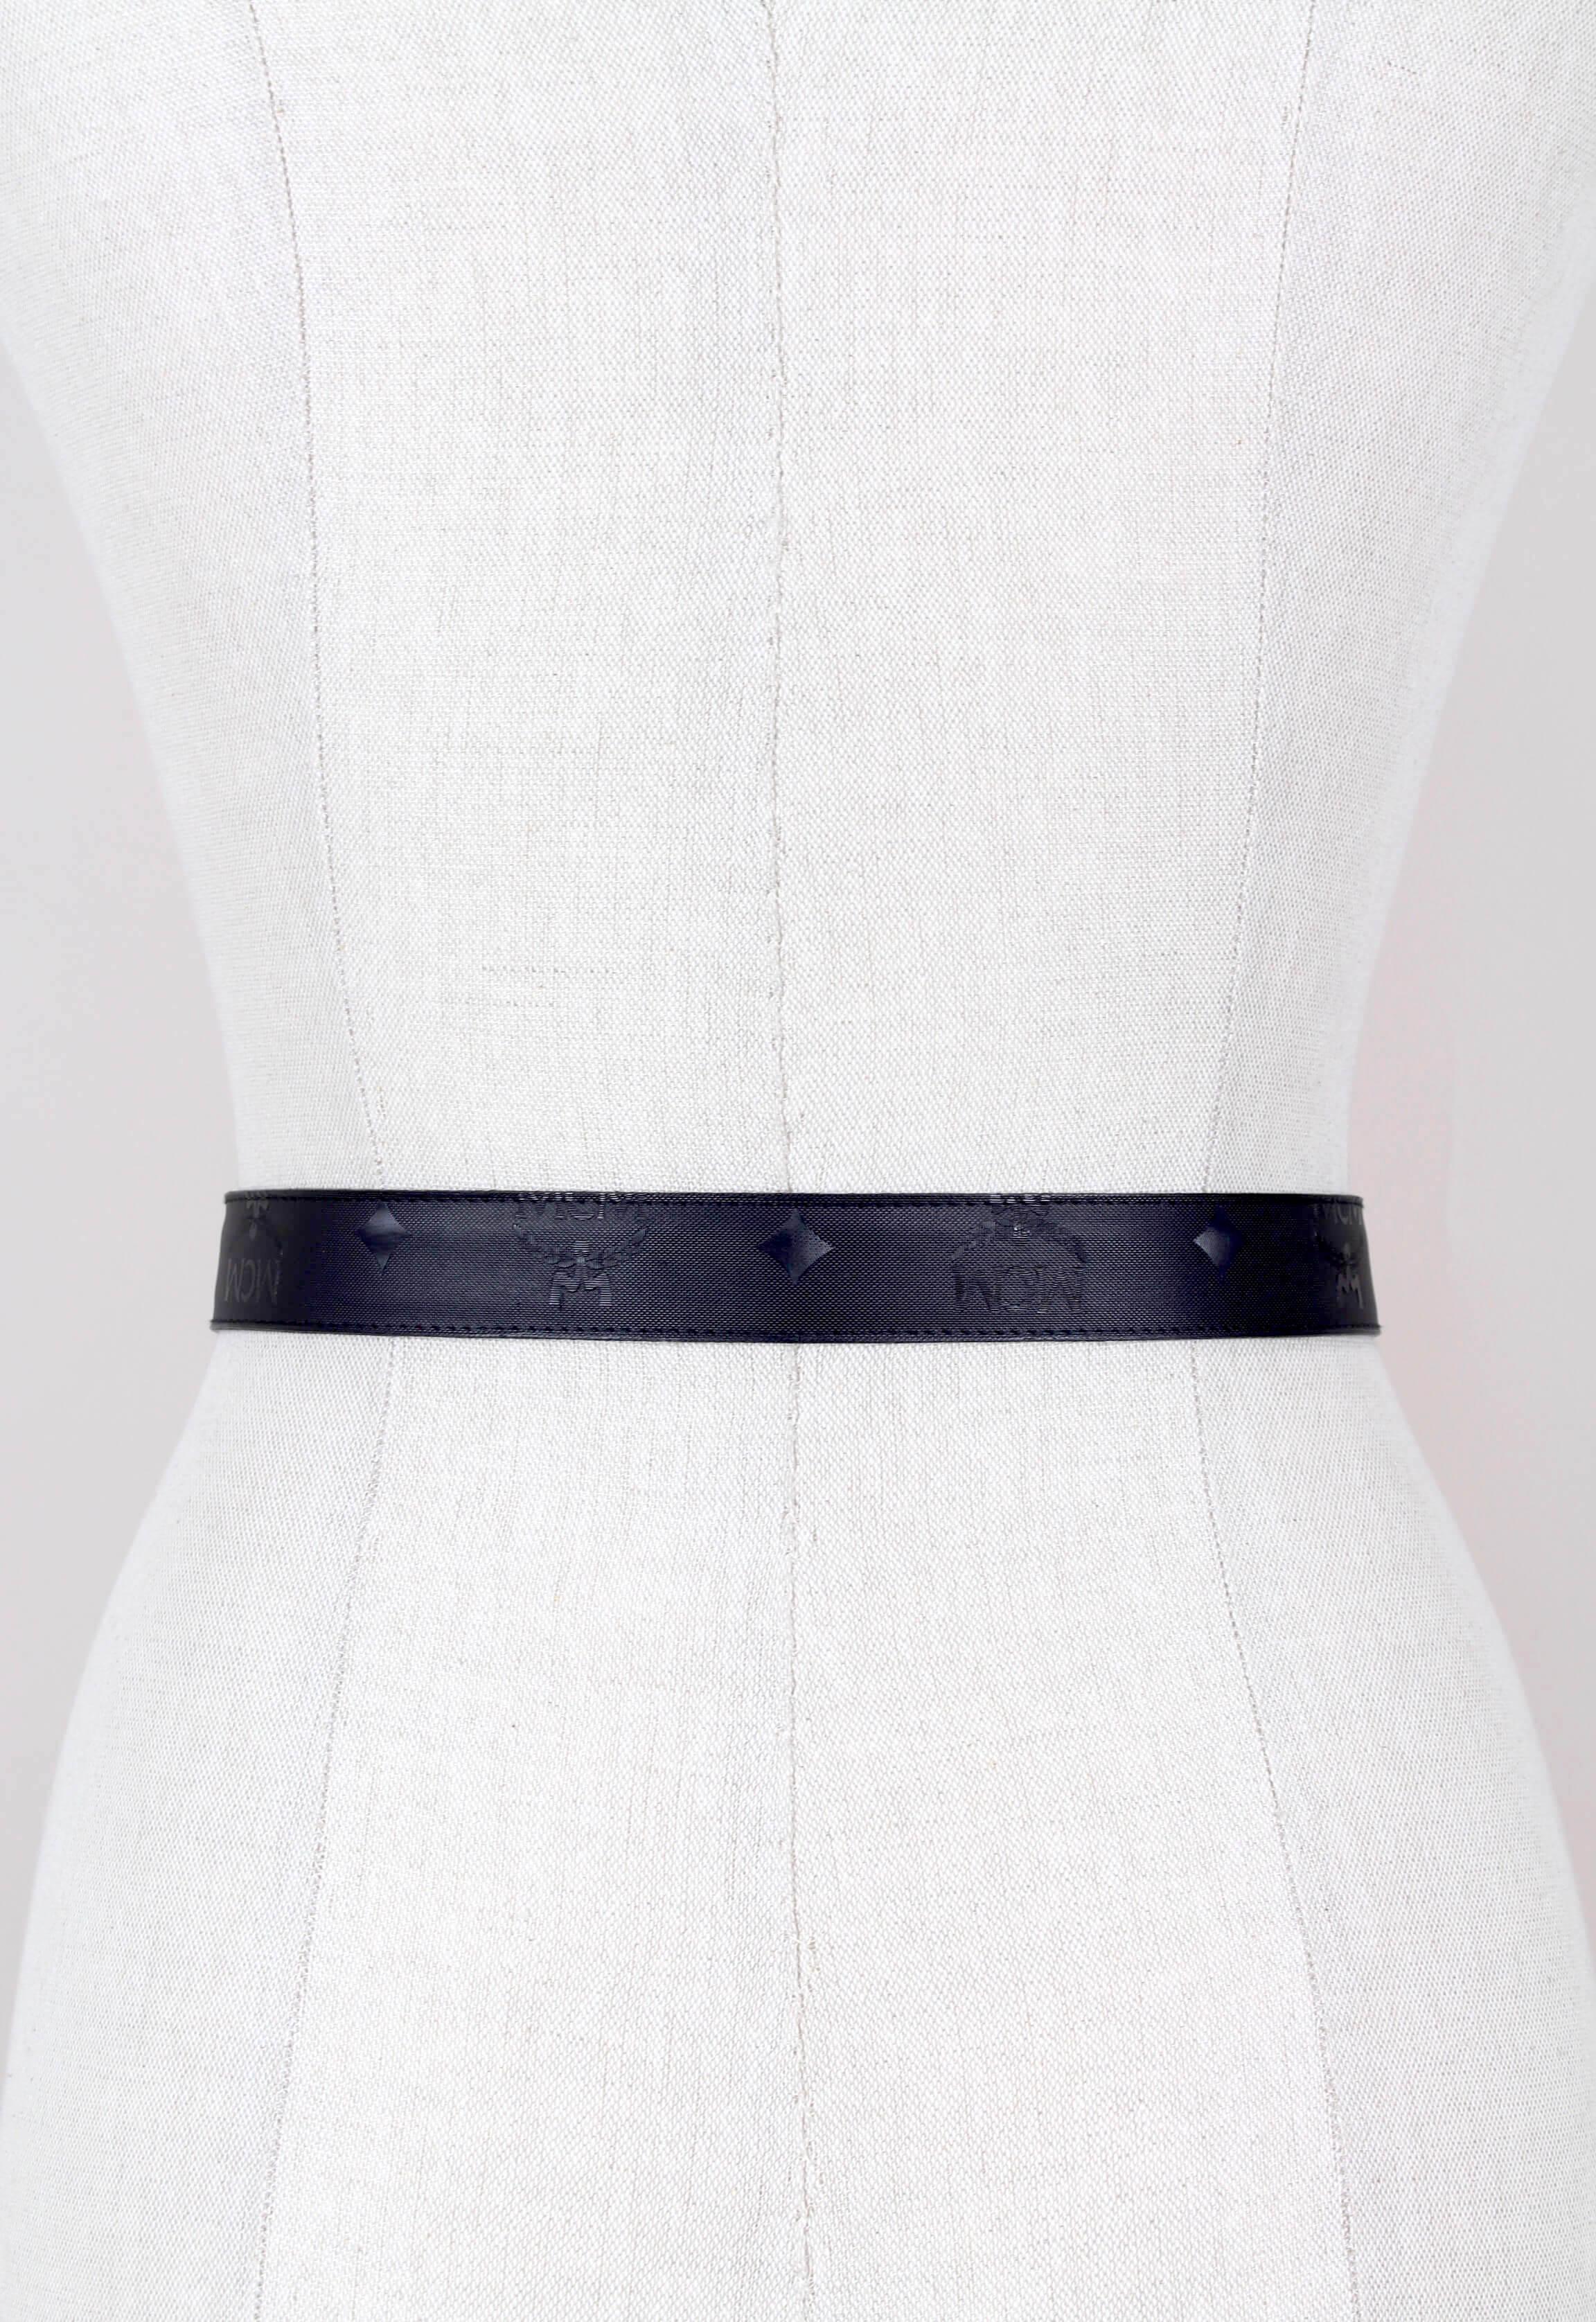 This 1980s MCM waist belt dates from that period when the company still belonged to its founder Michael Cromer. The black design is crafted from the brand’s signature logo-printed material, called Visetos – a coated canvas. It is set off with the